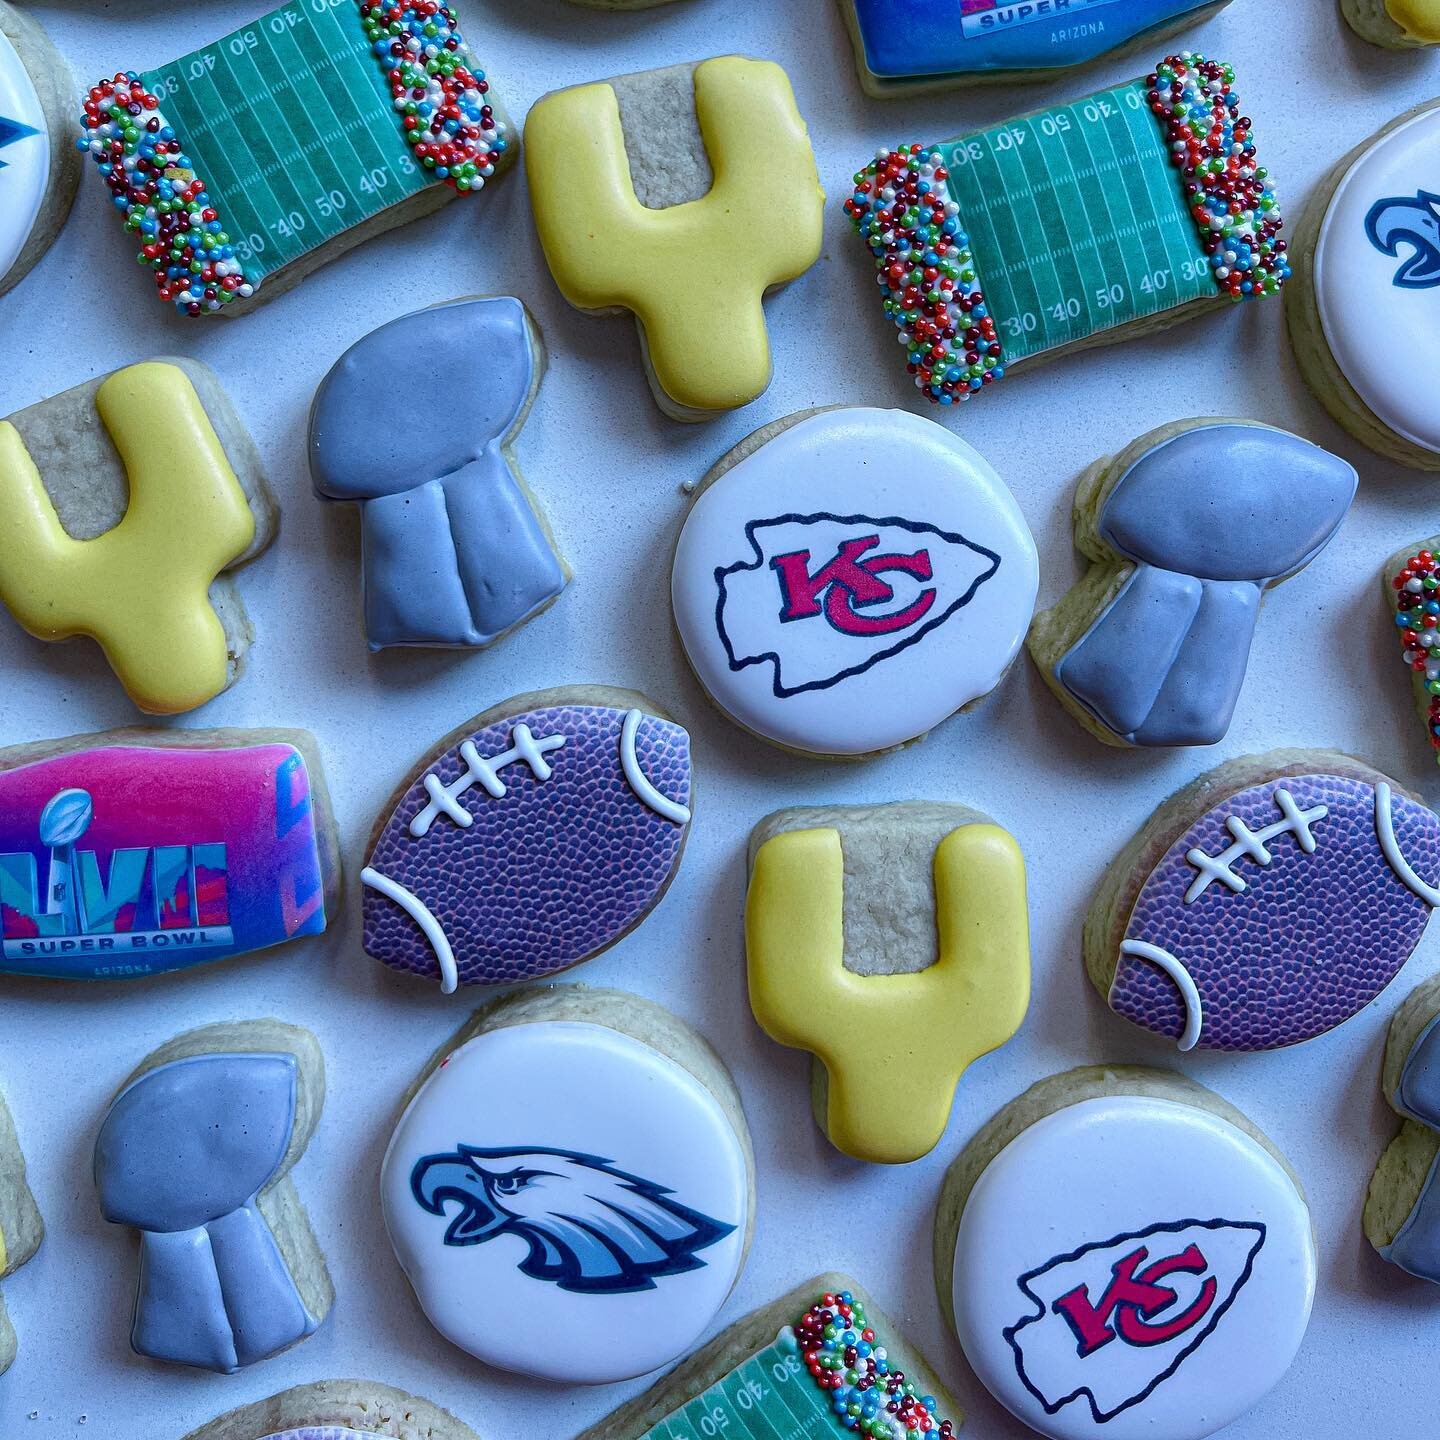 Hope you all are enjoying your Super Bowl Sunday! Who are you rooting for!?